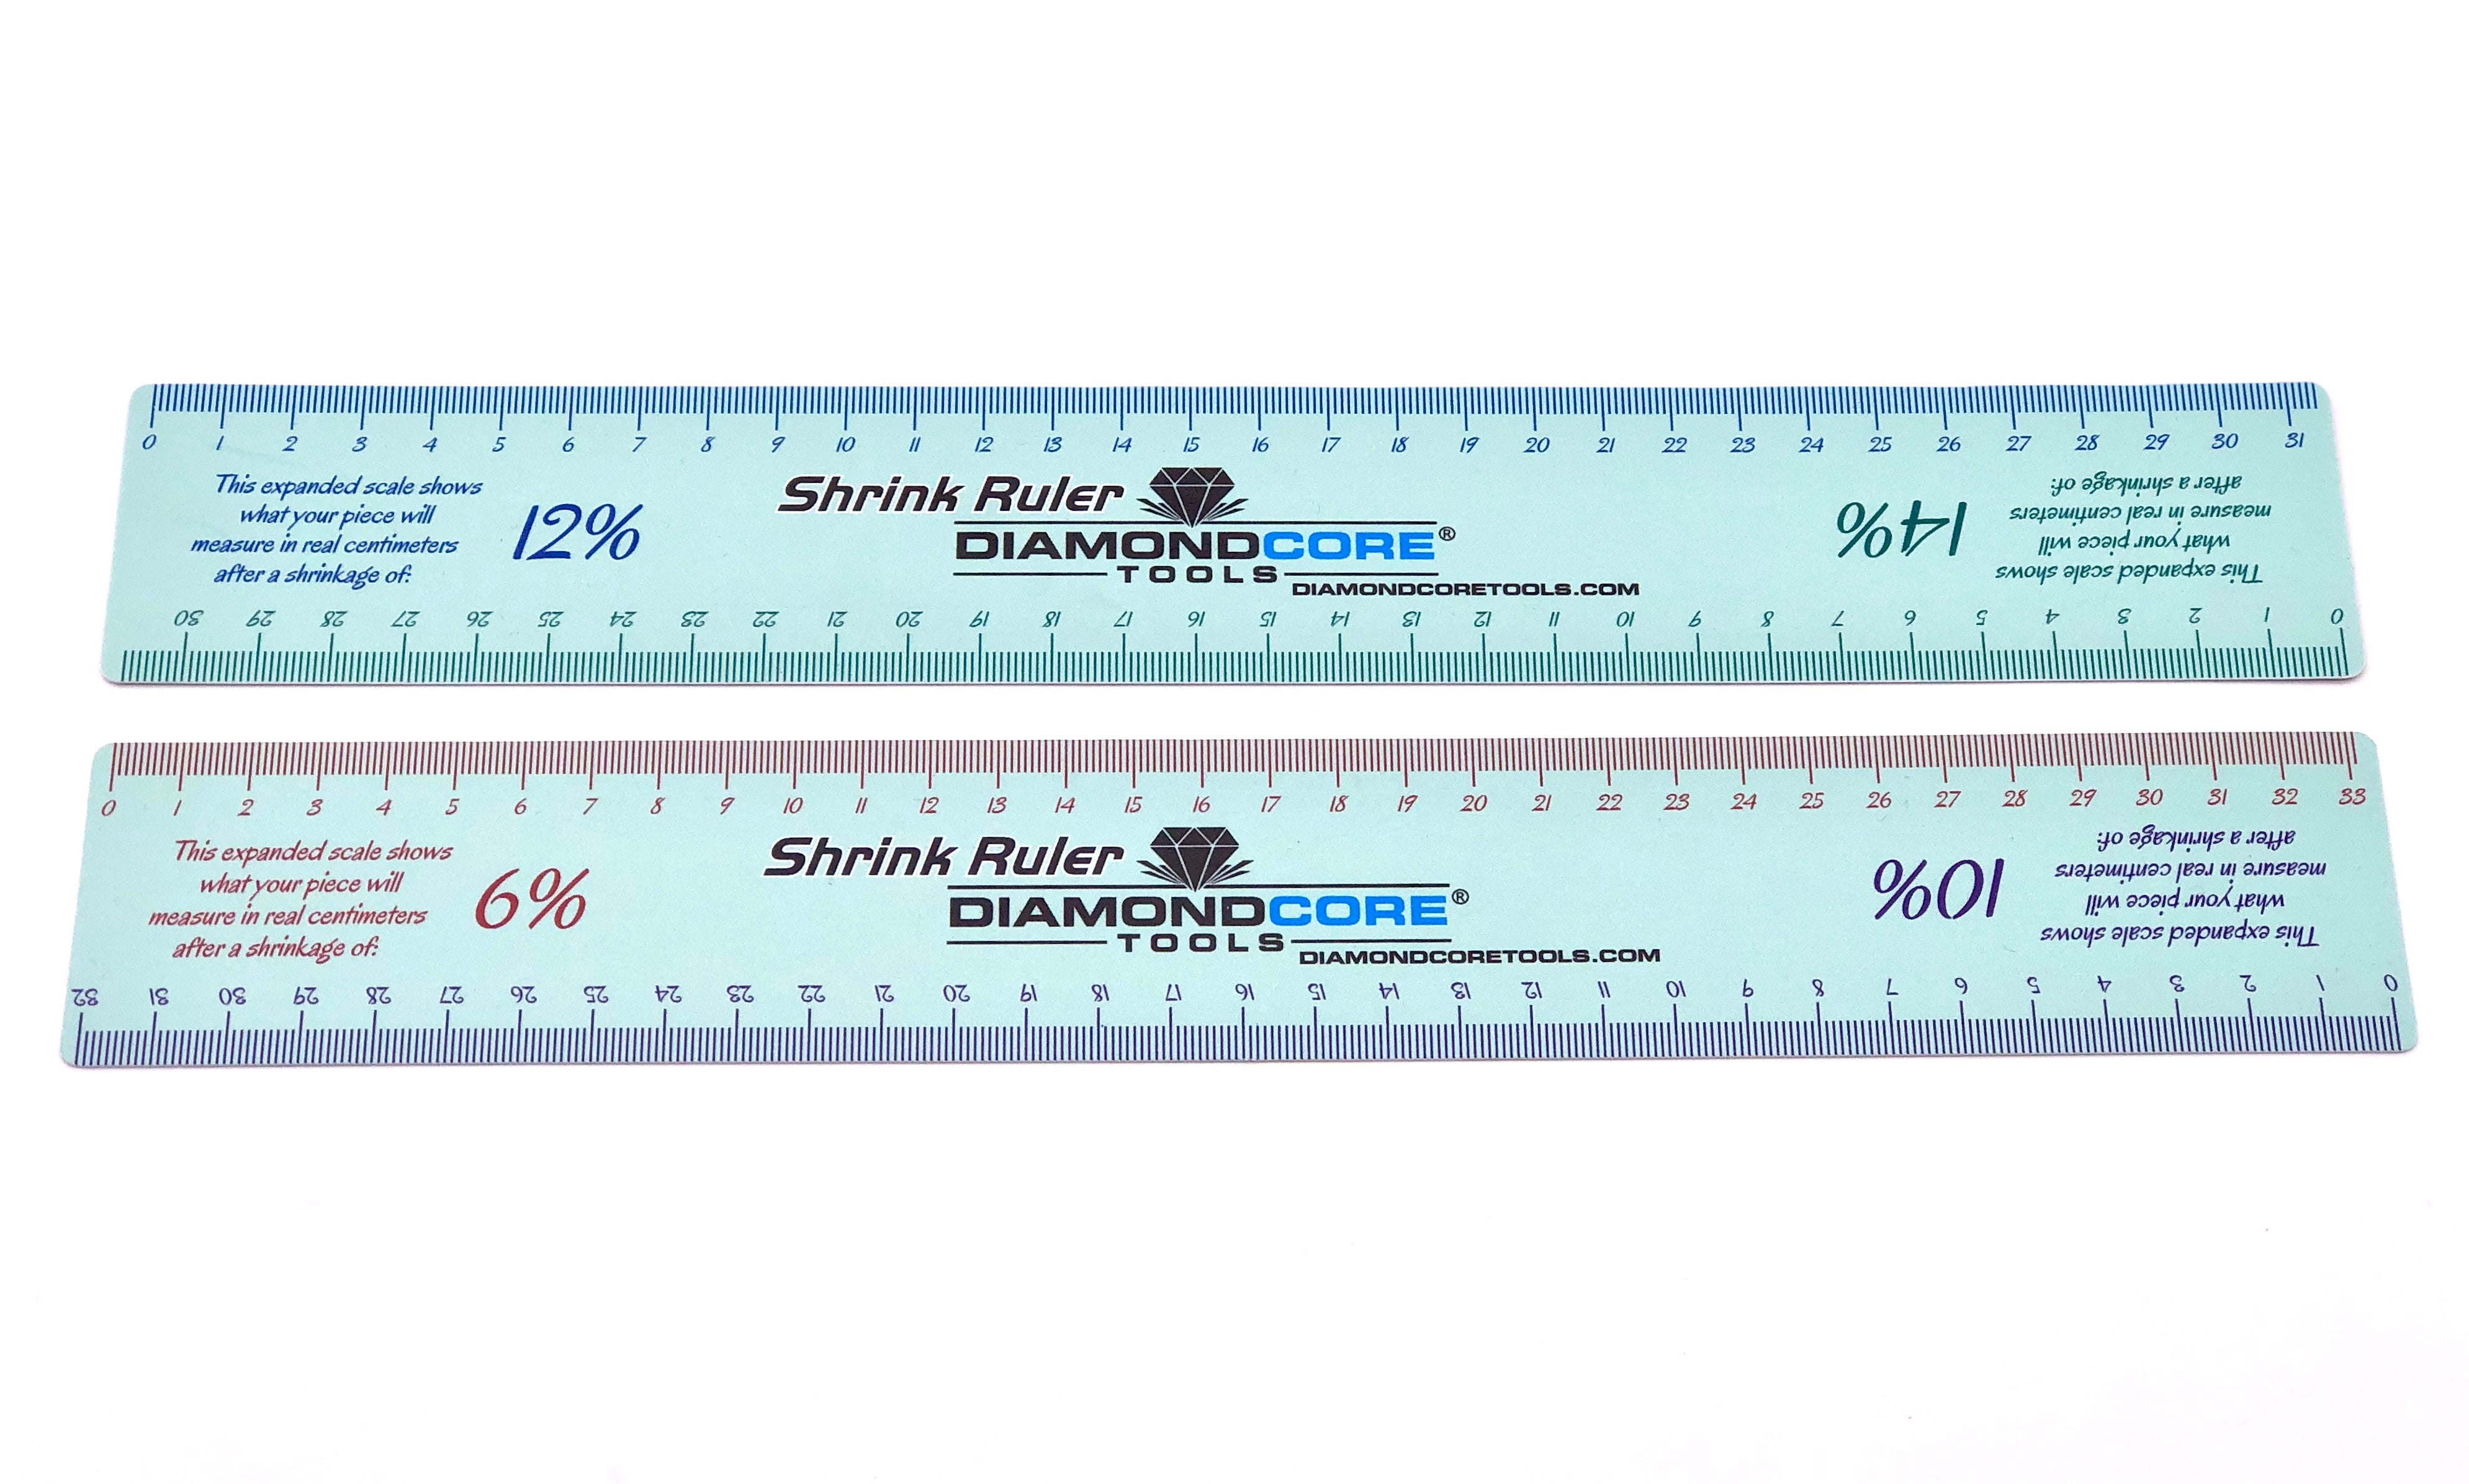 Heyco Precision Steel Ruler (Chesterman Type), 300mm/12